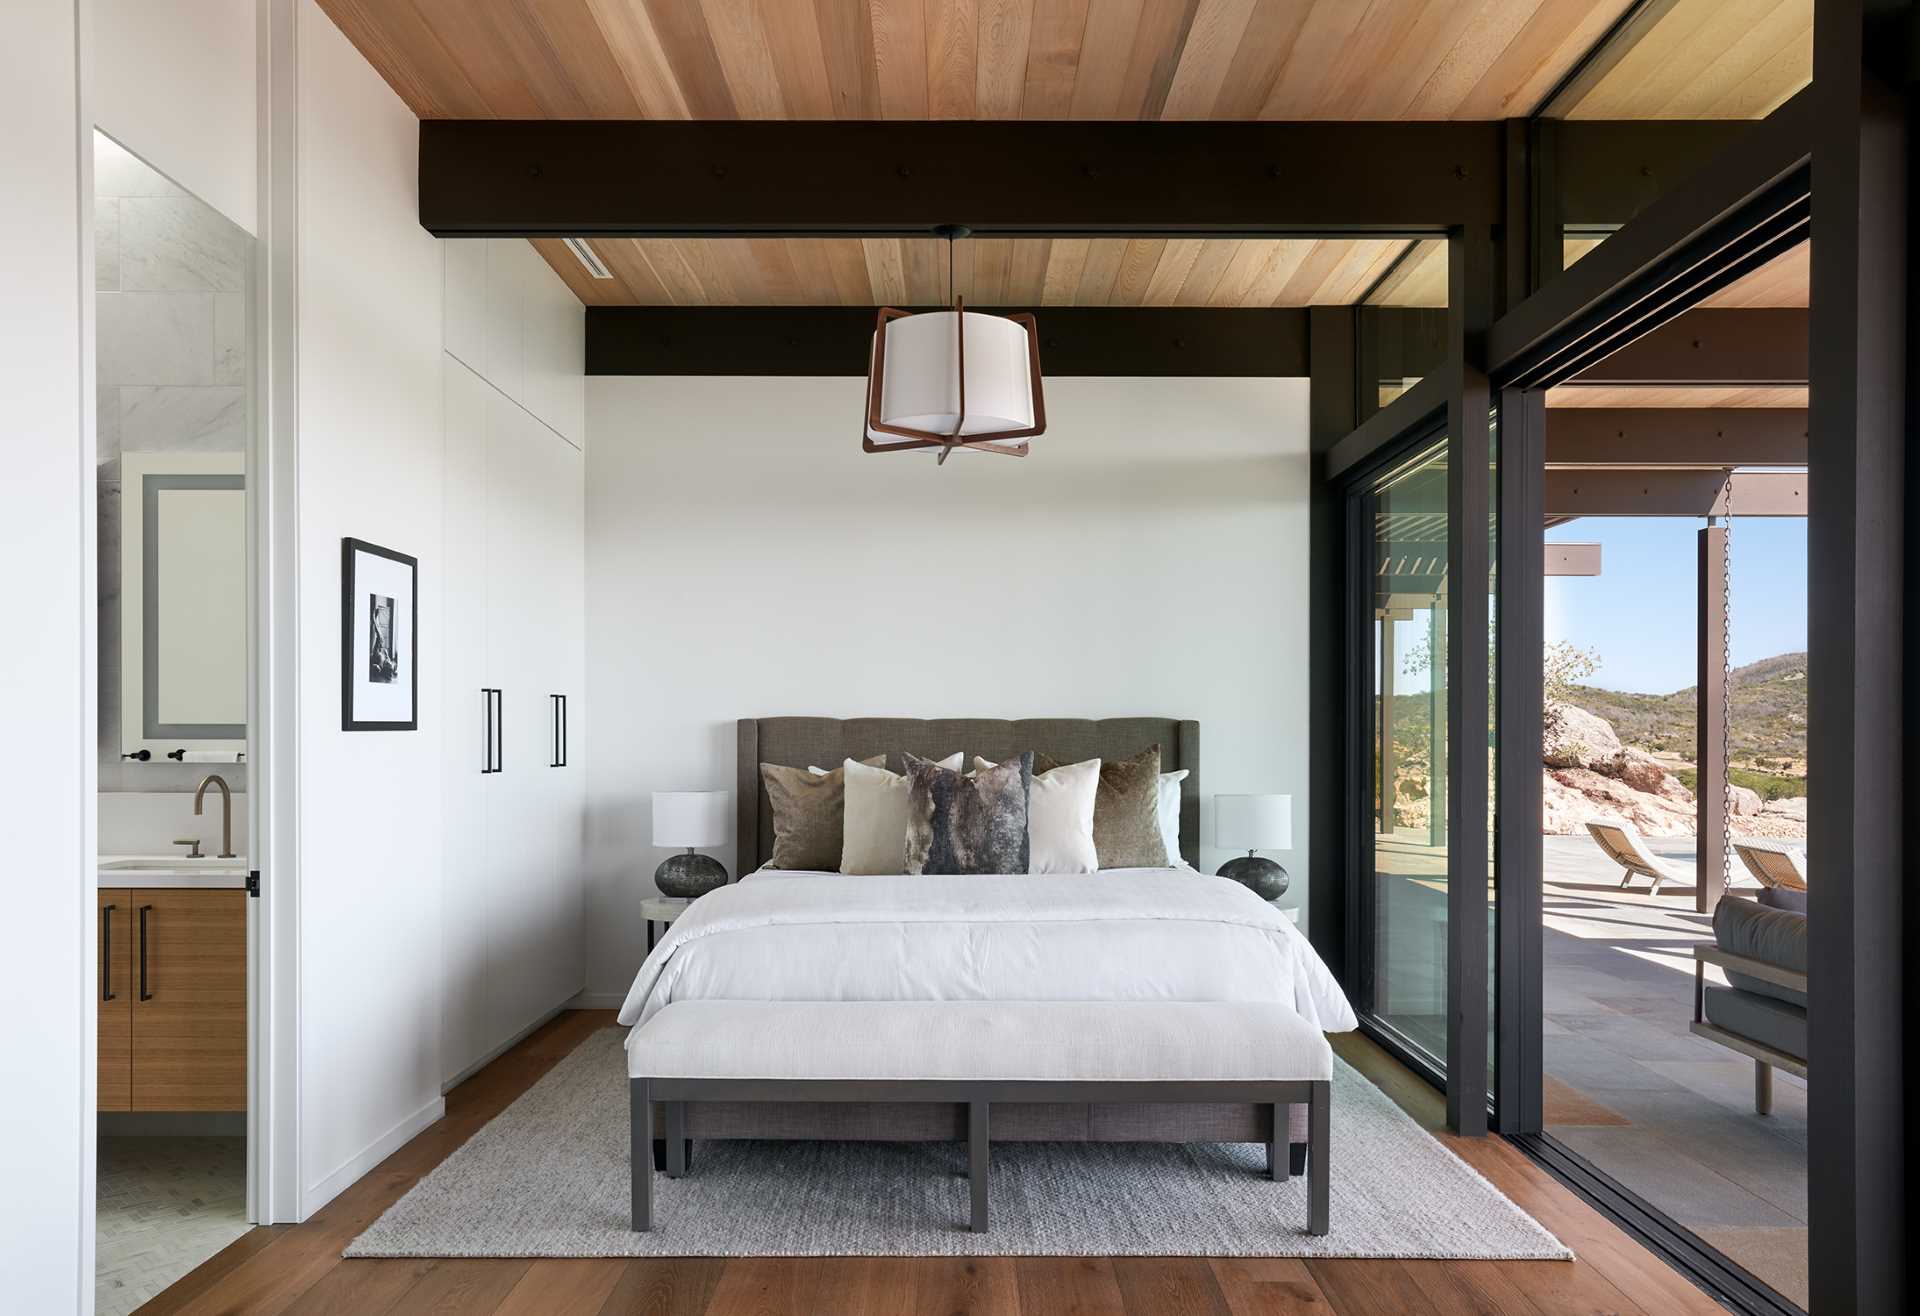 A modern bedroom with exposed beams.